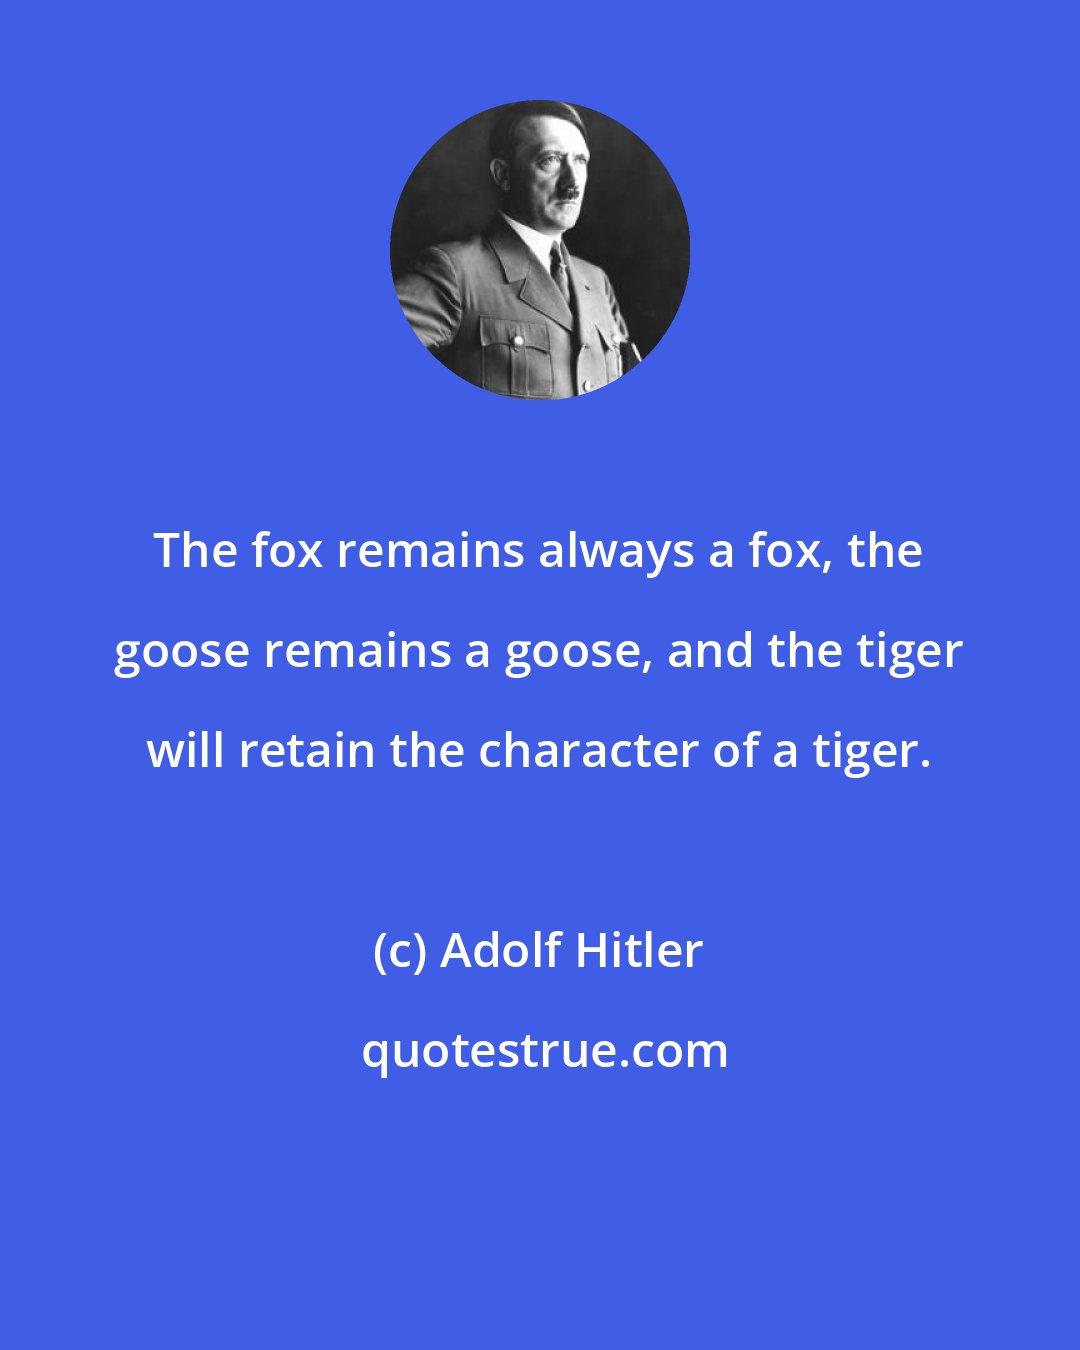 Adolf Hitler: The fox remains always a fox, the goose remains a goose, and the tiger will retain the character of a tiger.